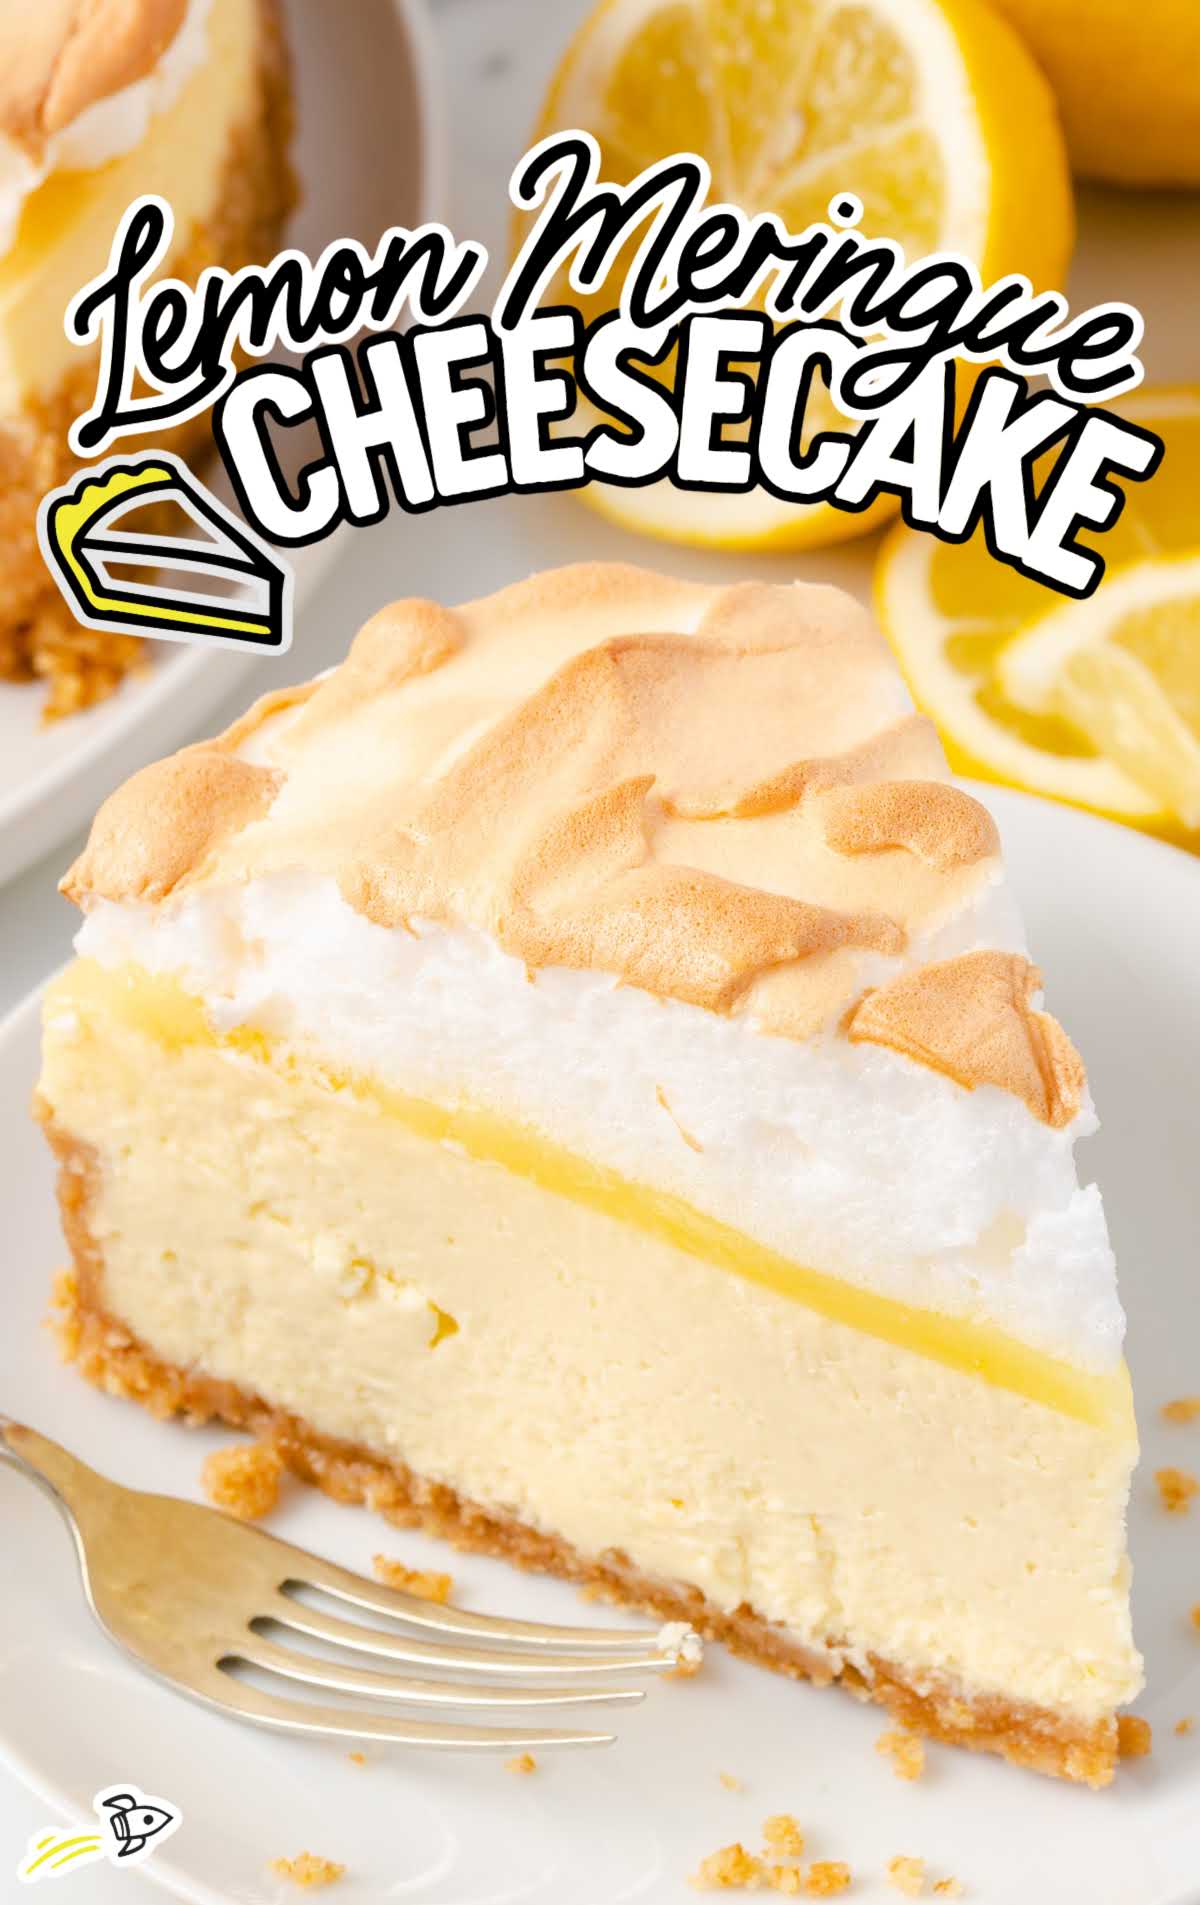 a close-up shot of a slice of Lemon Meringue Cheesecake on a plate